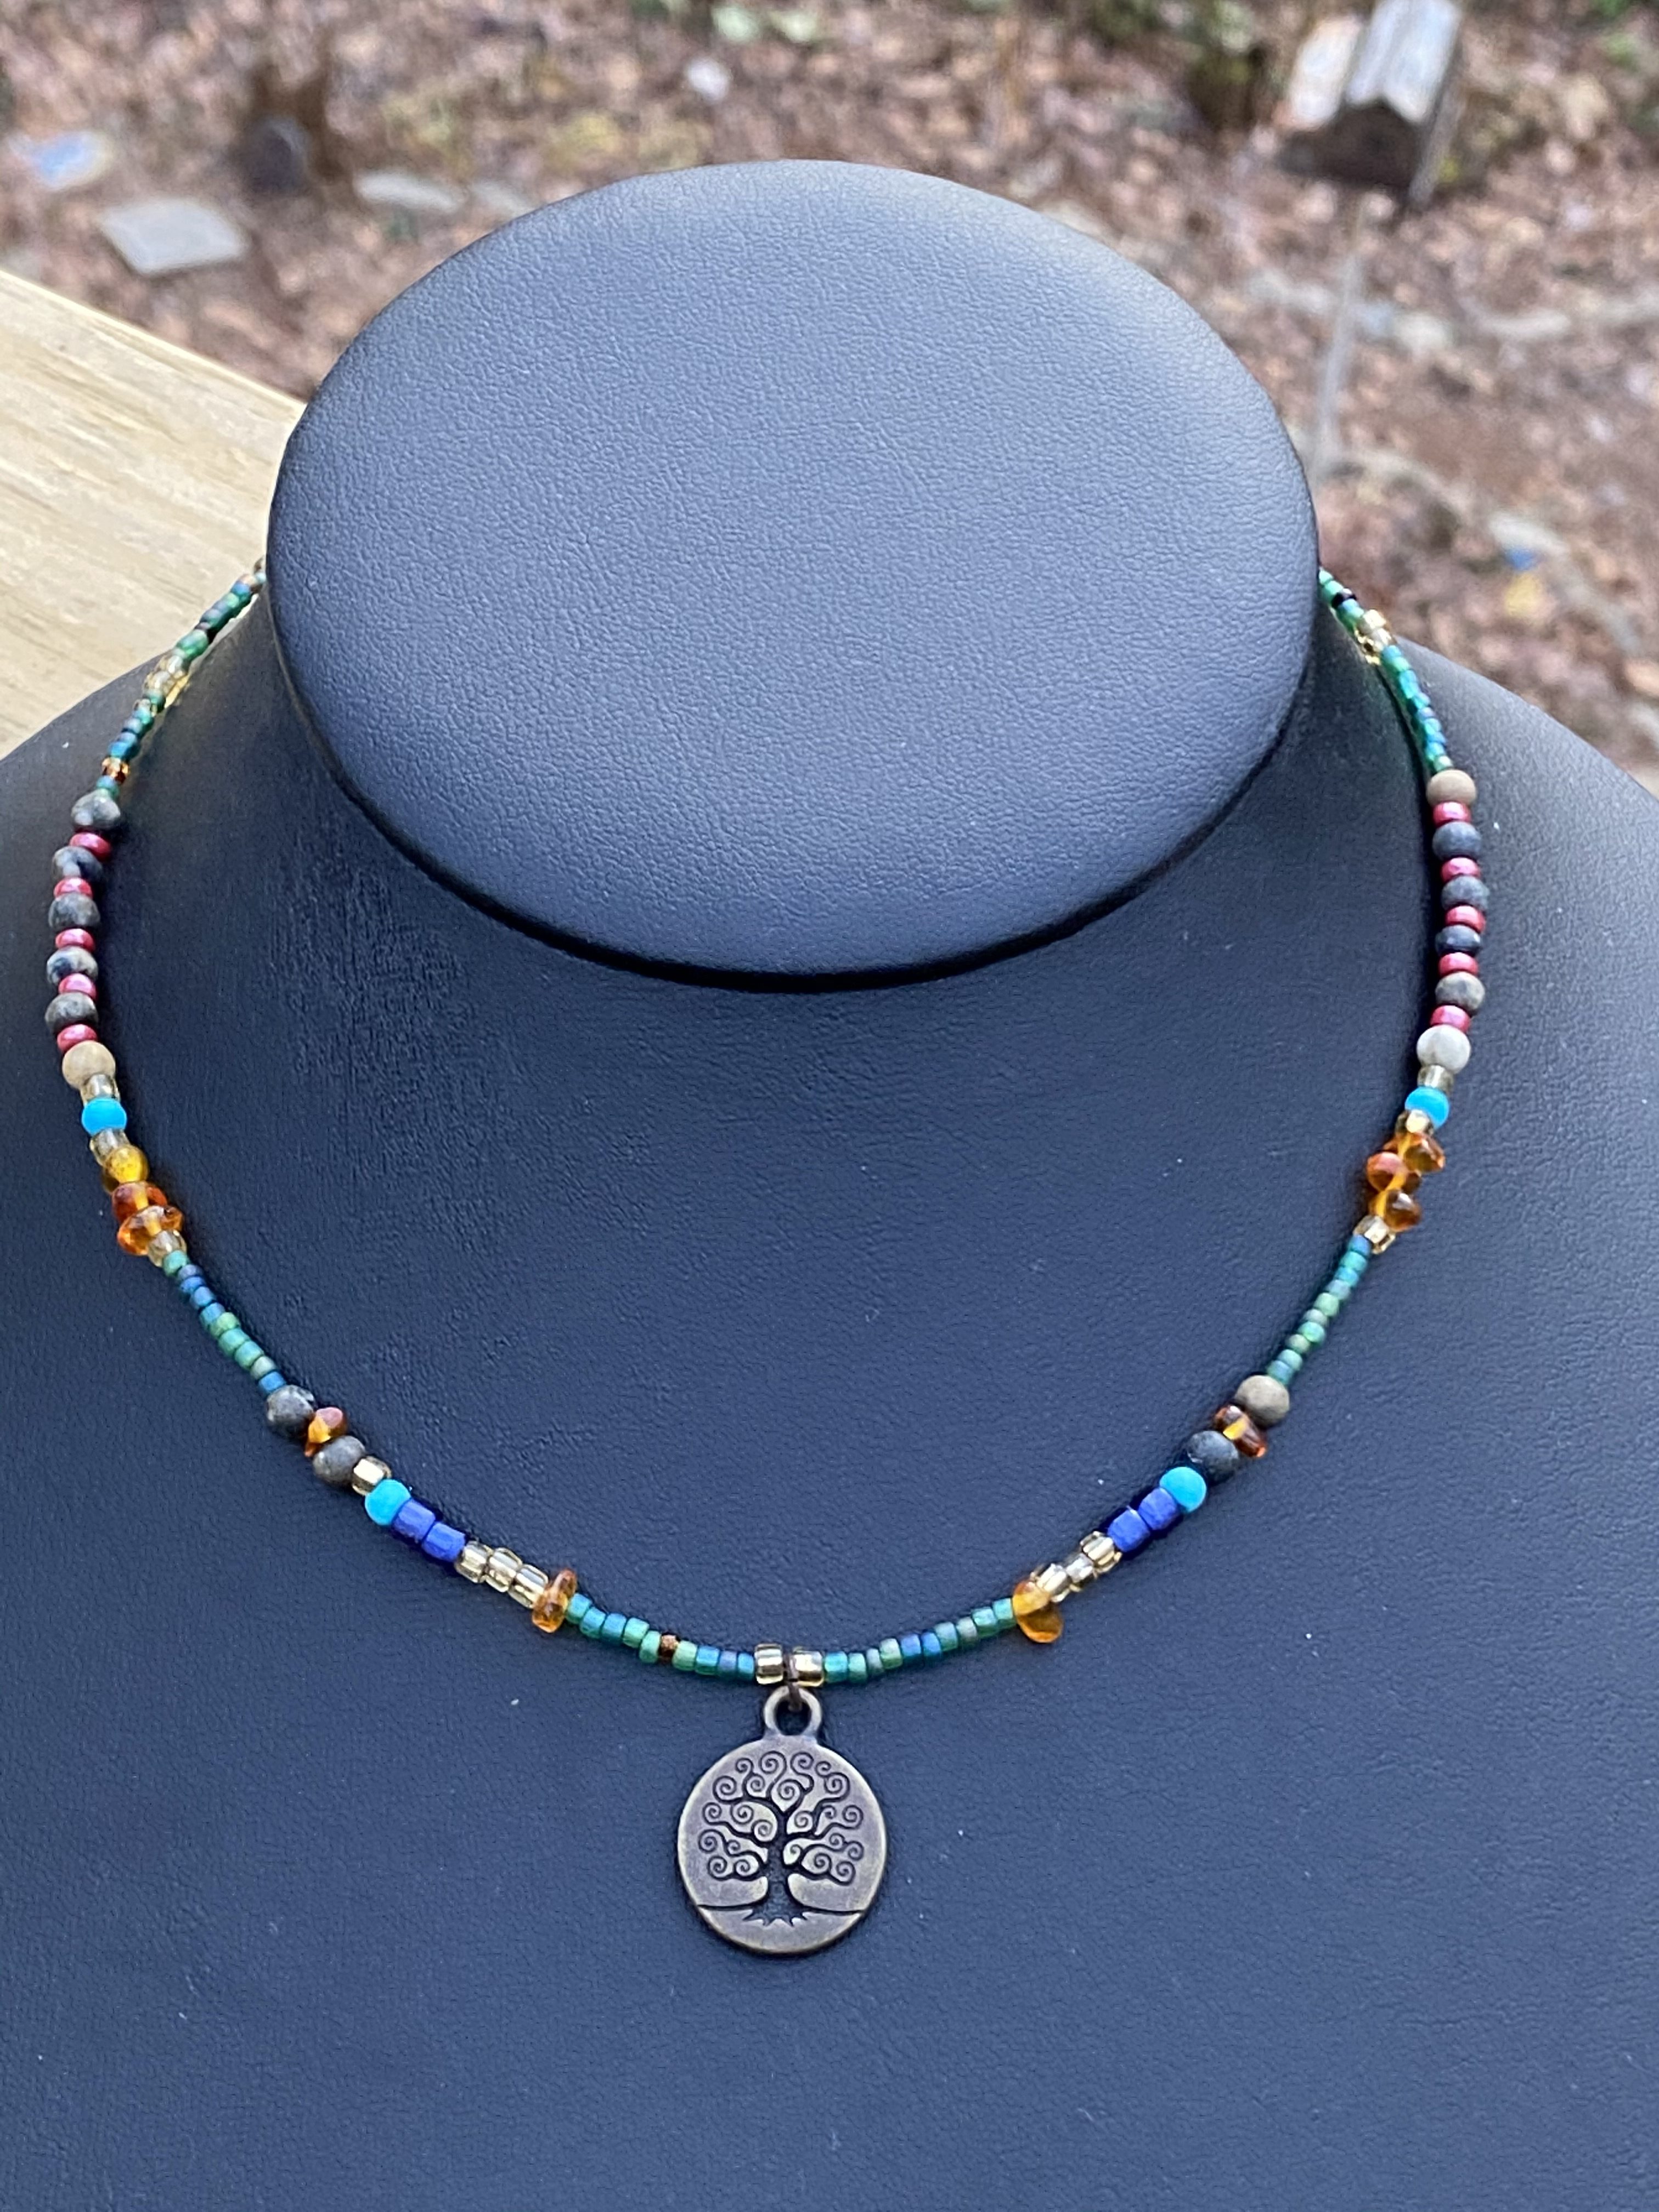 necklace with charm - 16"